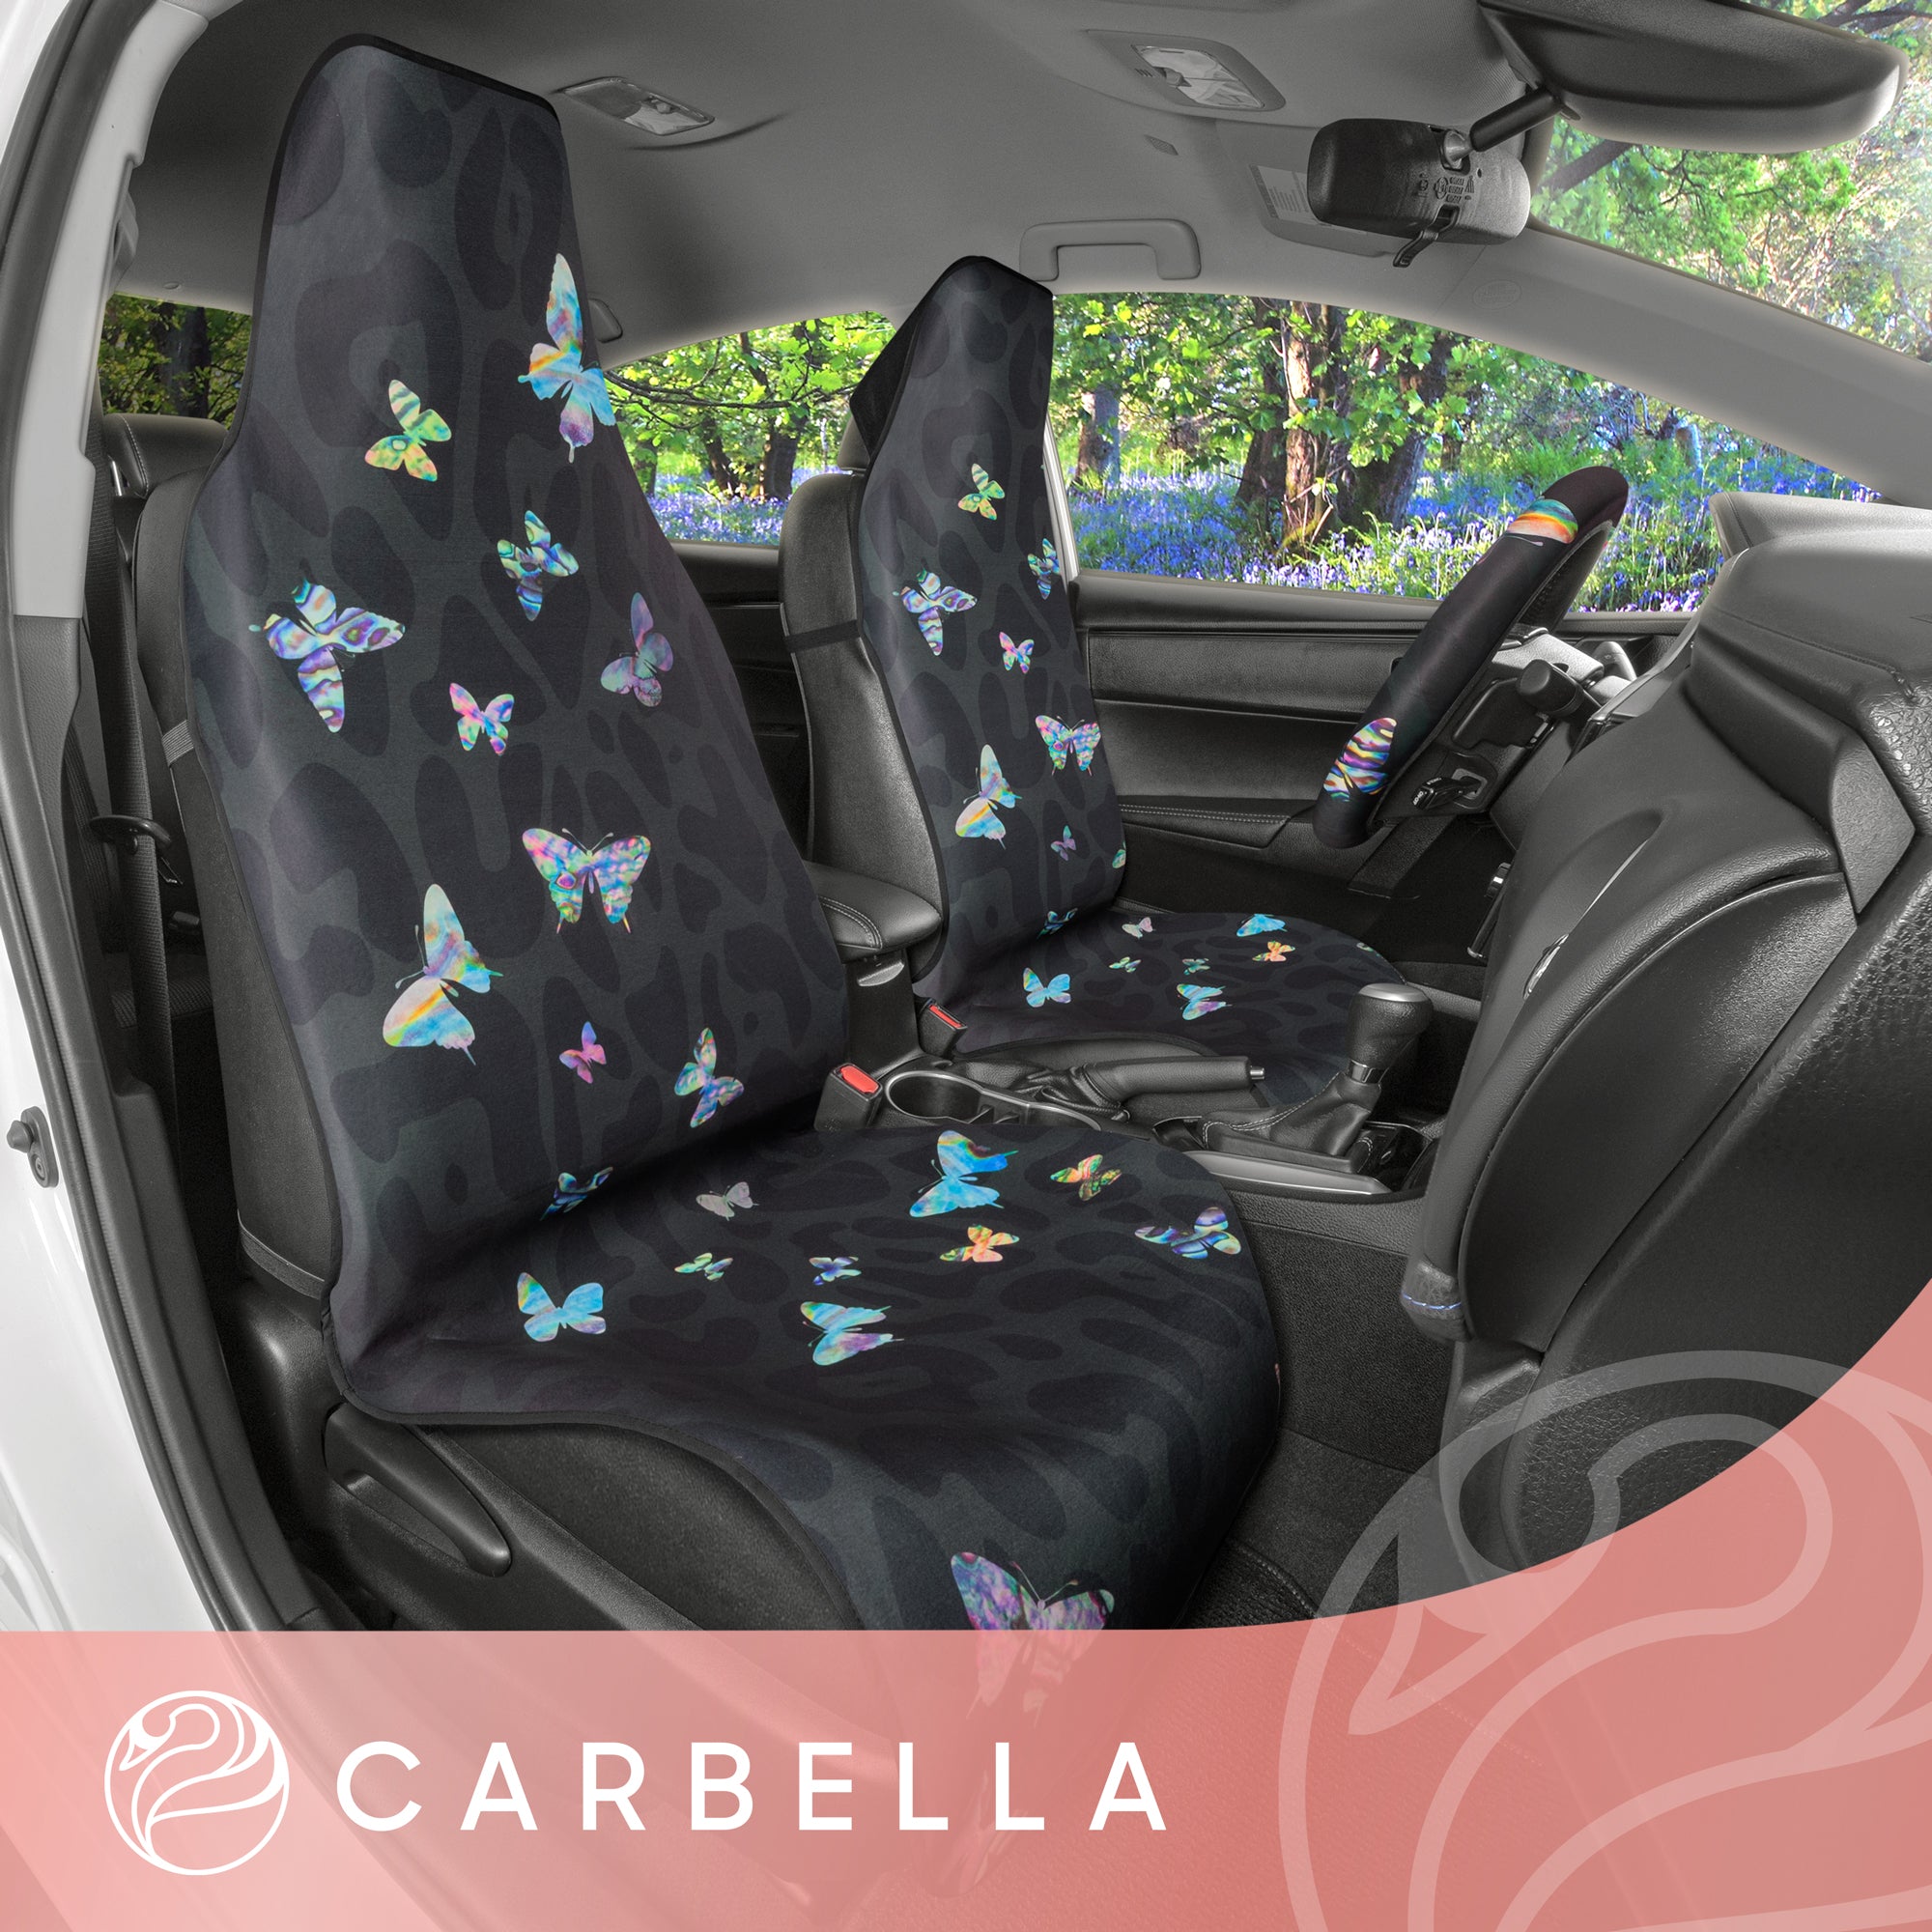 Carbella Black Leopard & Butterfly Car Seat Covers, 2 Pack Animal Print Front Seat Covers for Cars with Matching Steering Wheel Cover, Cute Automotive Interior Covers for Trucks Van SUV